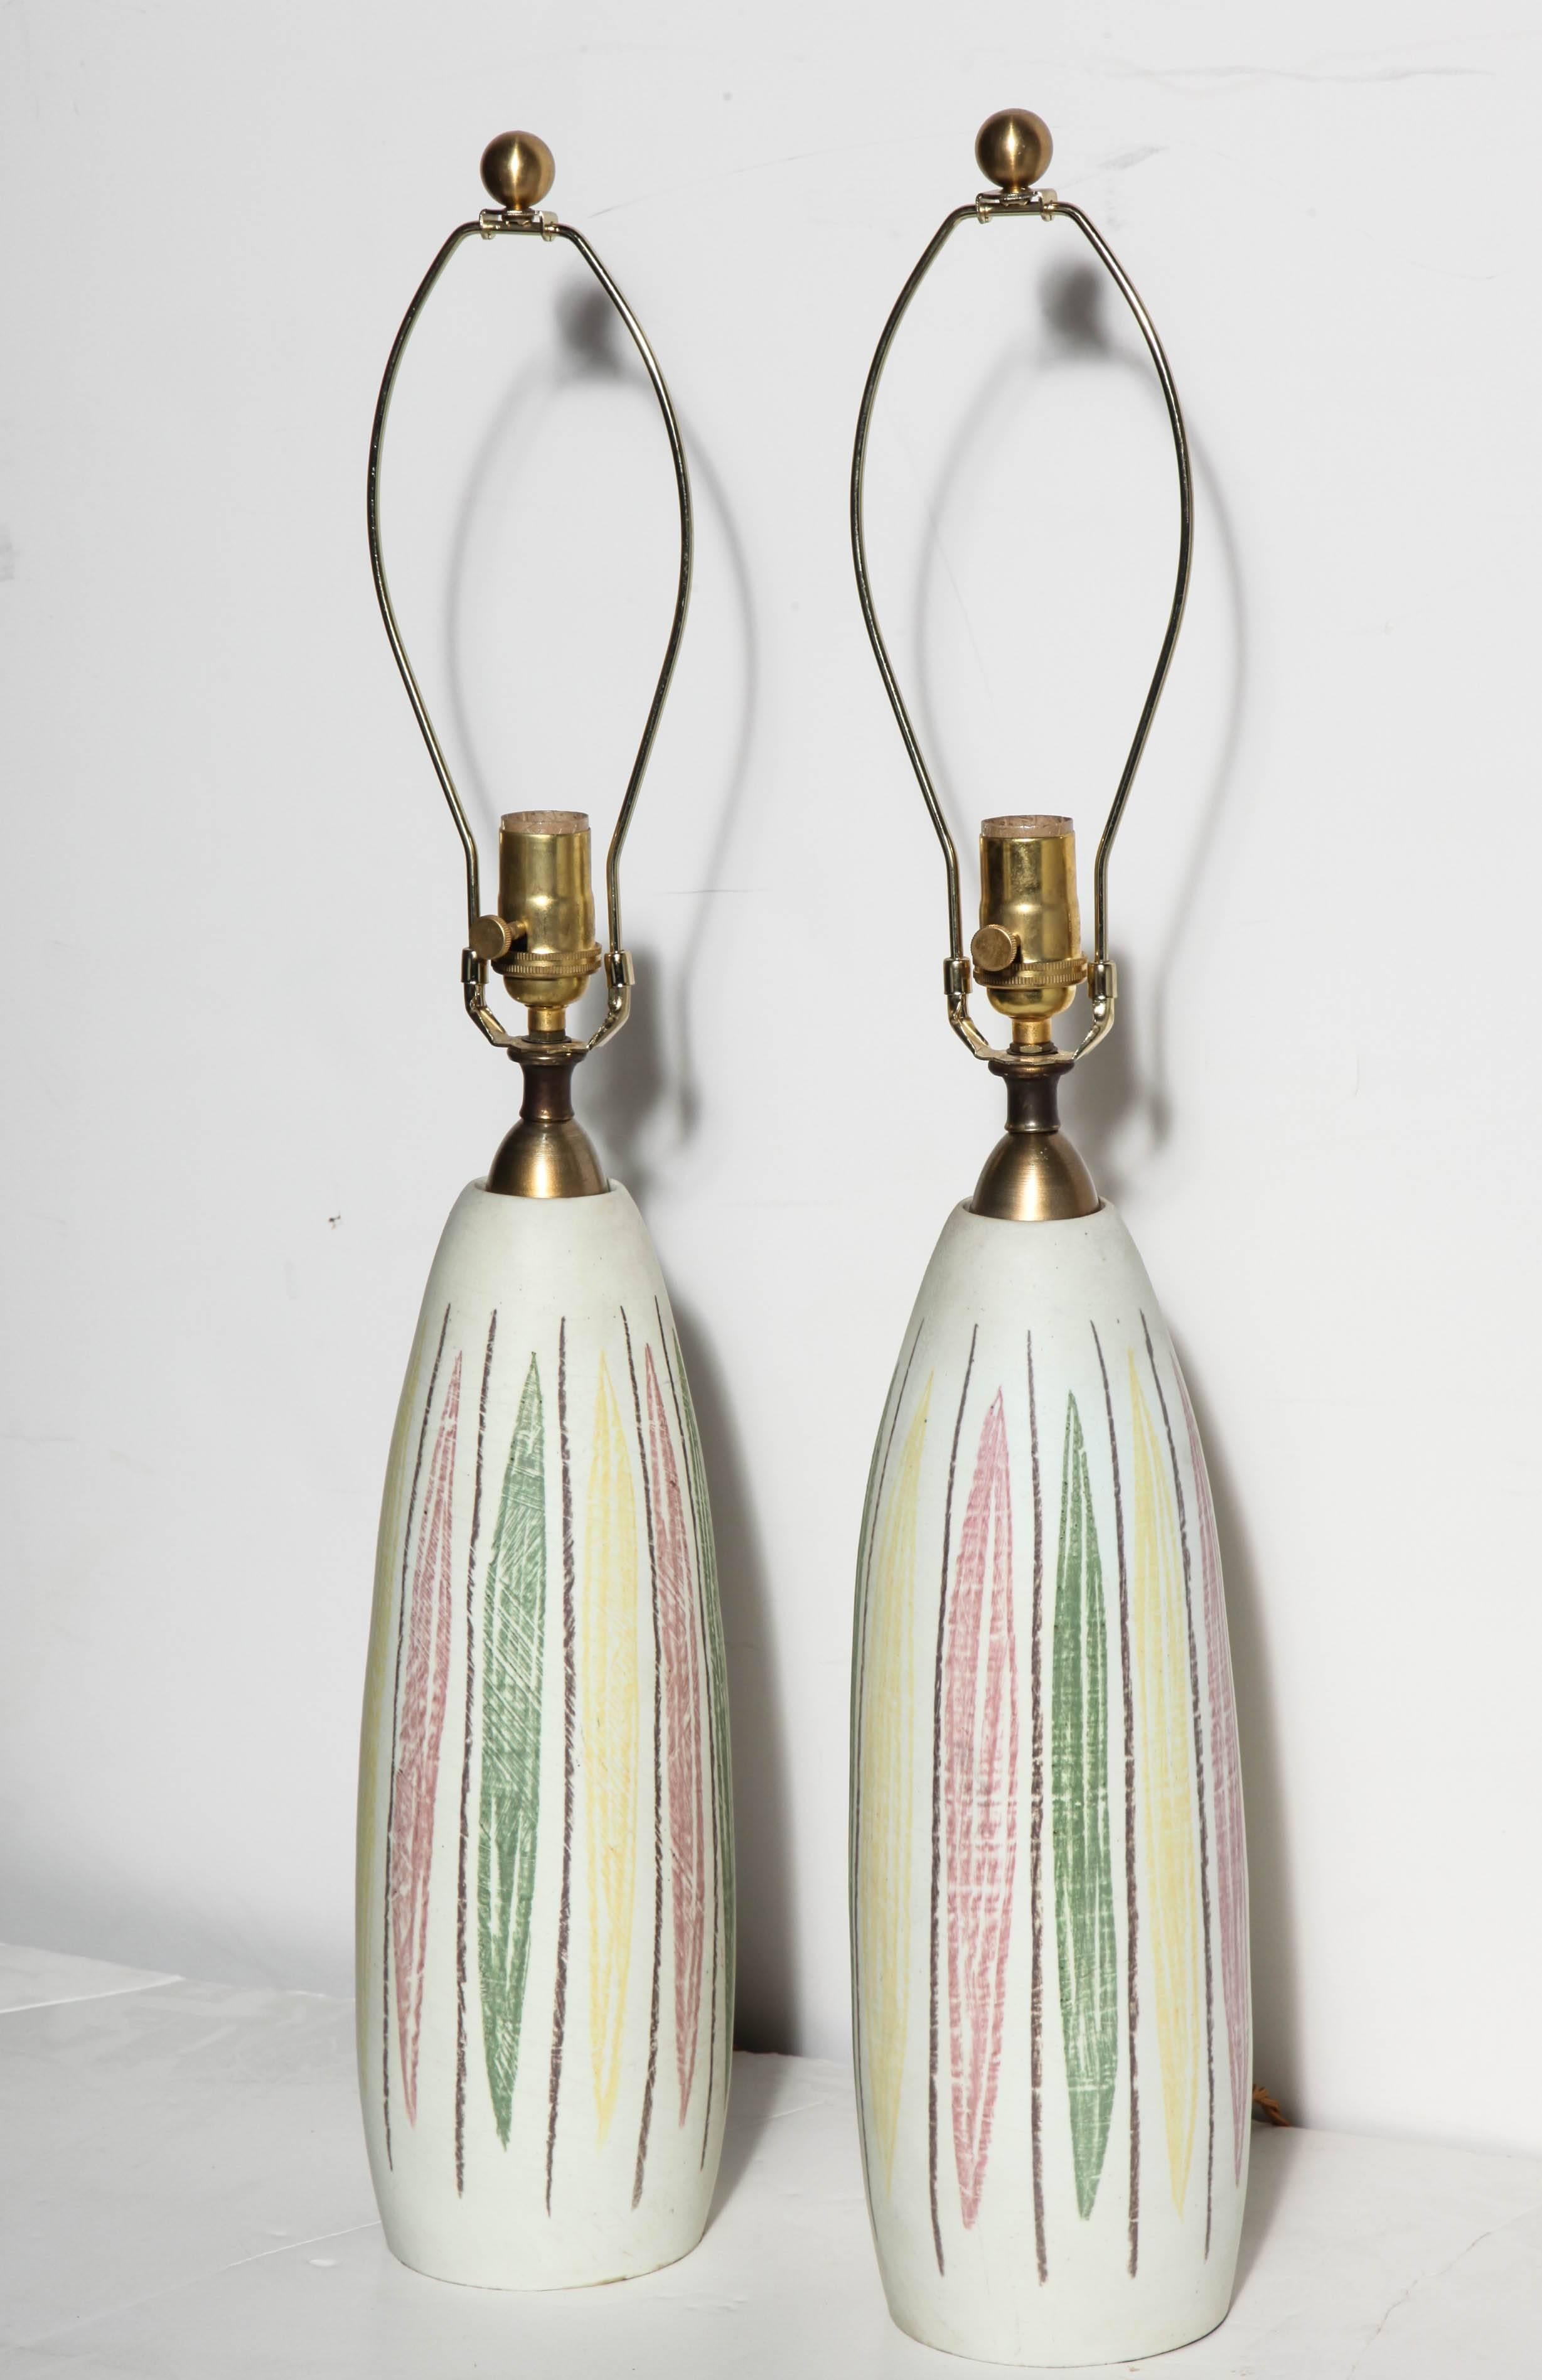 Pair of colorful bottle form Cream Italian Modern Ceramic Table Lamps. Highlighted with free hand organic leaf shaped patterns in Pale Green, Light Yellow and subtle Pink; accented with thin Brown vertical lines. Brass stem.  Made in Italy. Rewired